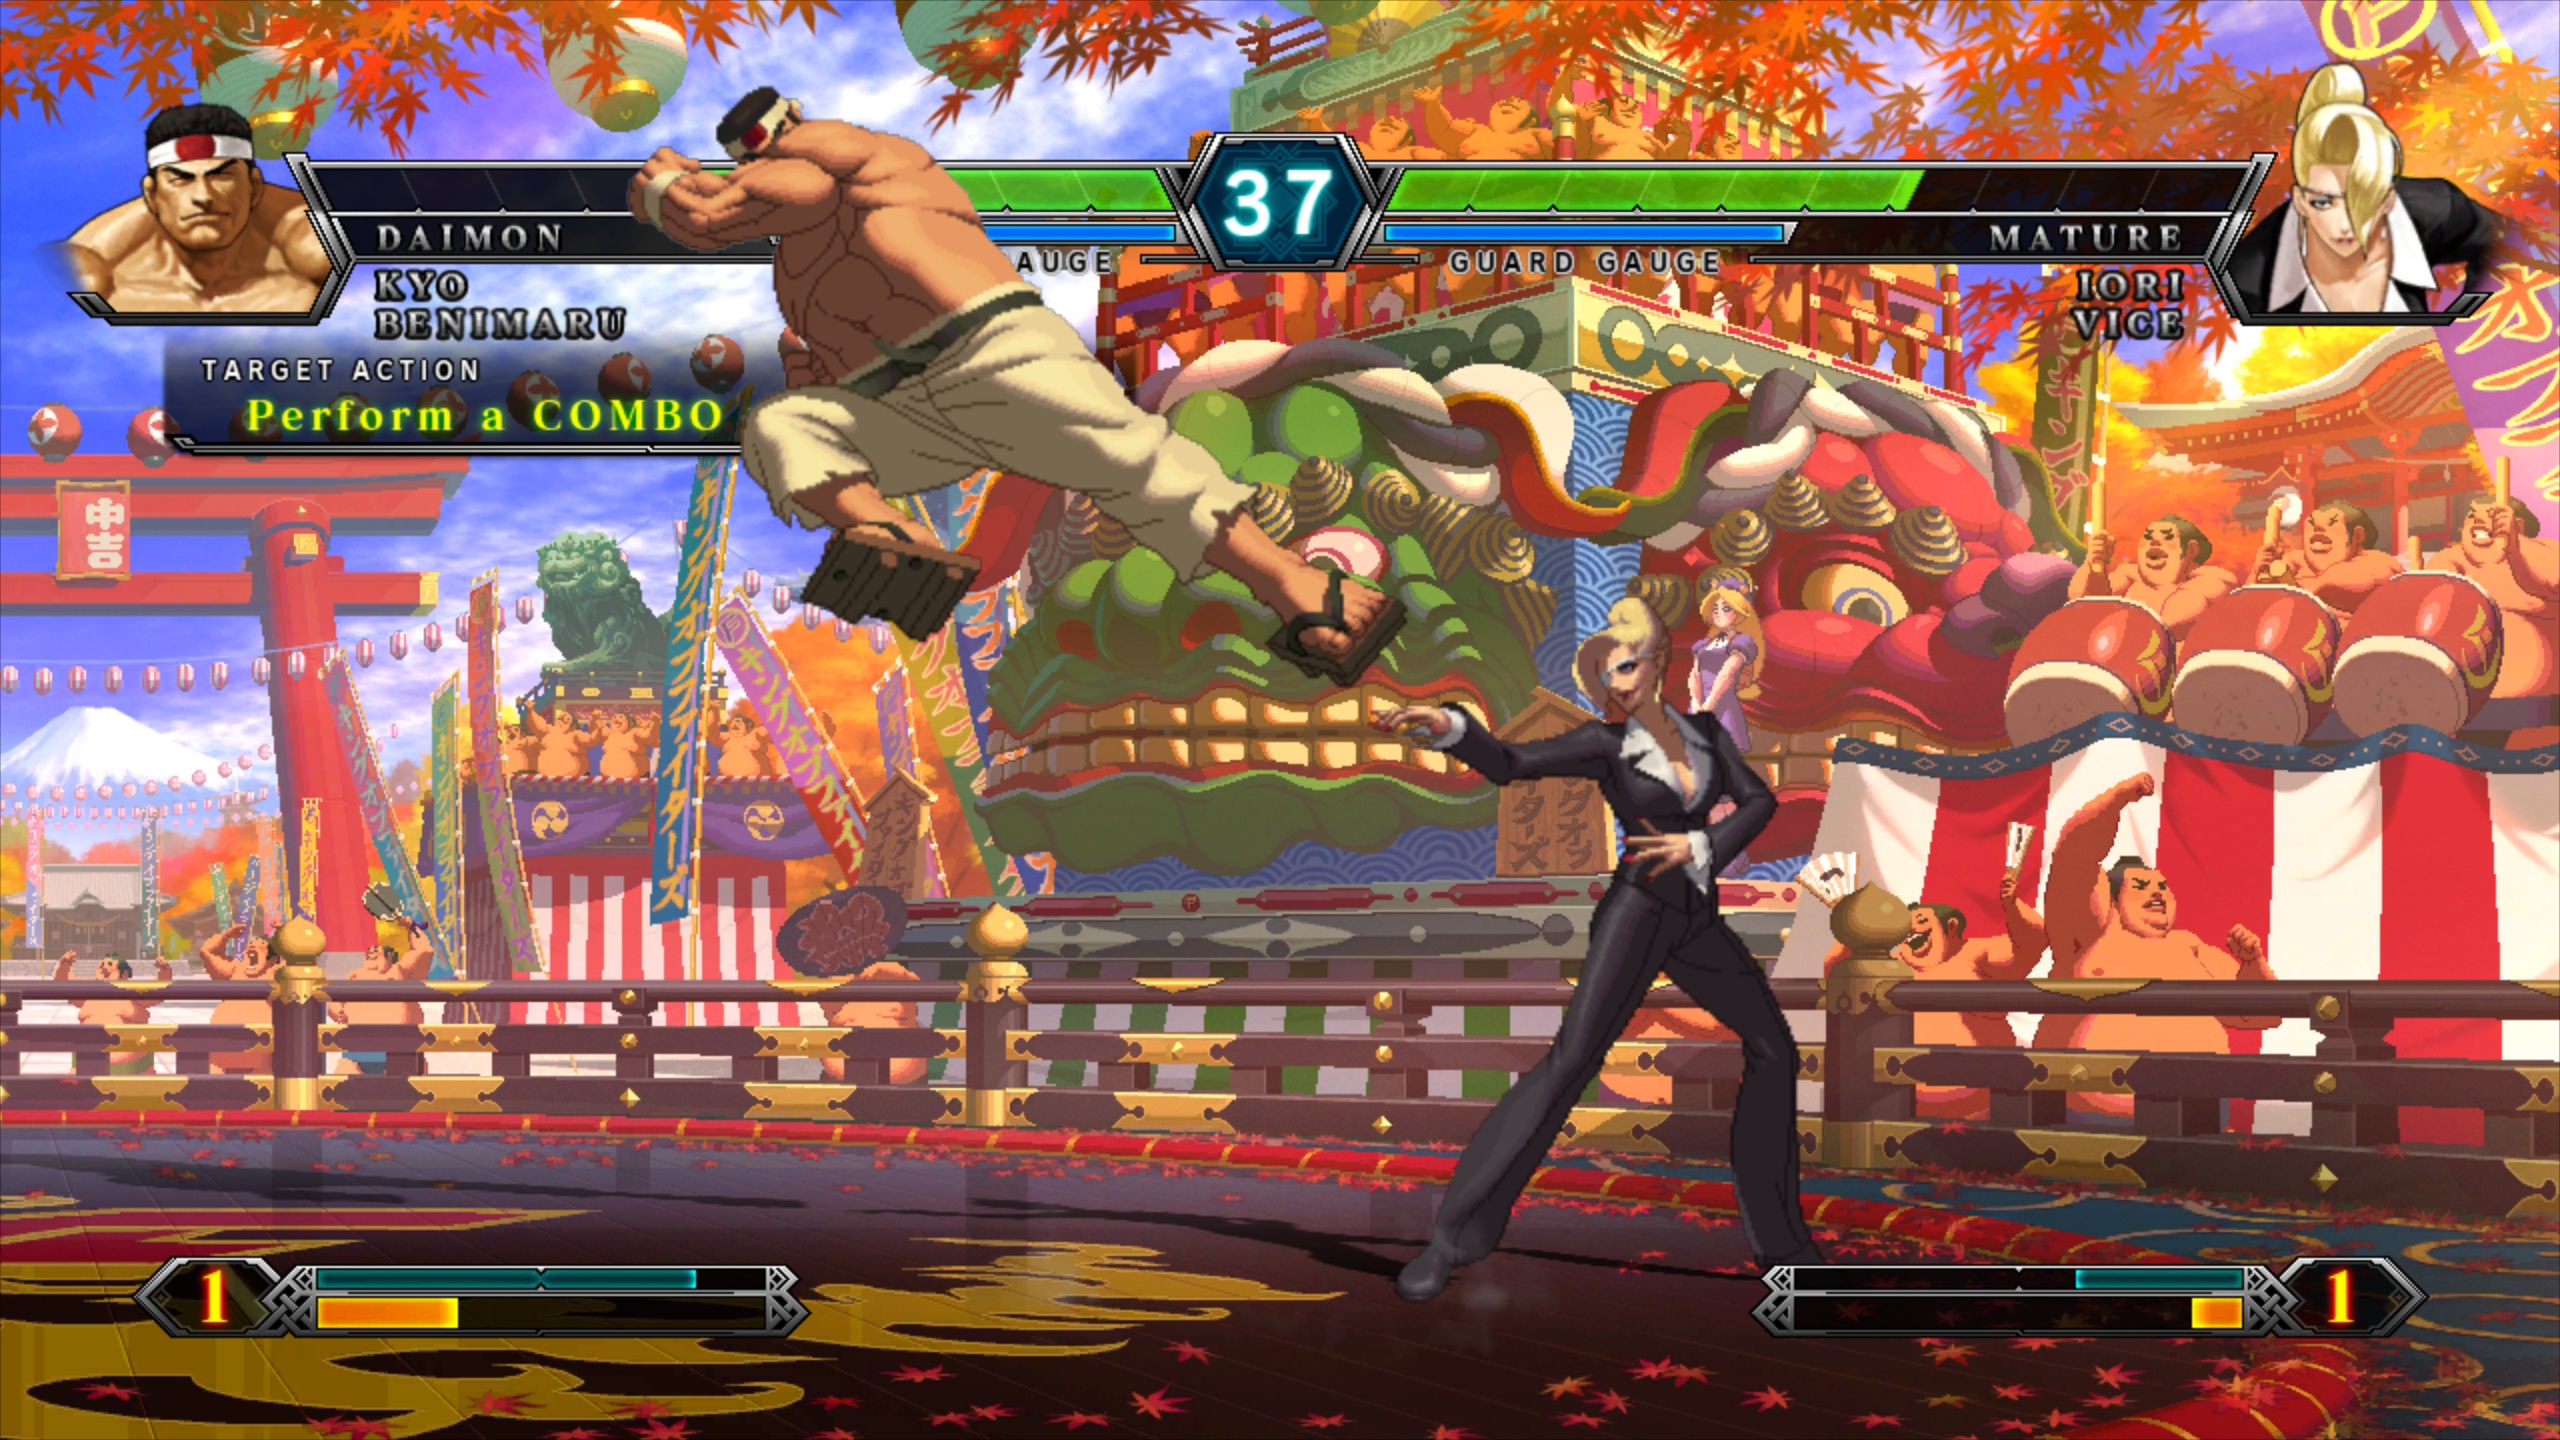 A large muscular masc looking person performing a downward kick onto a femme looking person in a suit who has her hands raised. Two progress bars sit at the top of the screen, and two bars sit at the bottom. Text reads 'Perform a combo'.